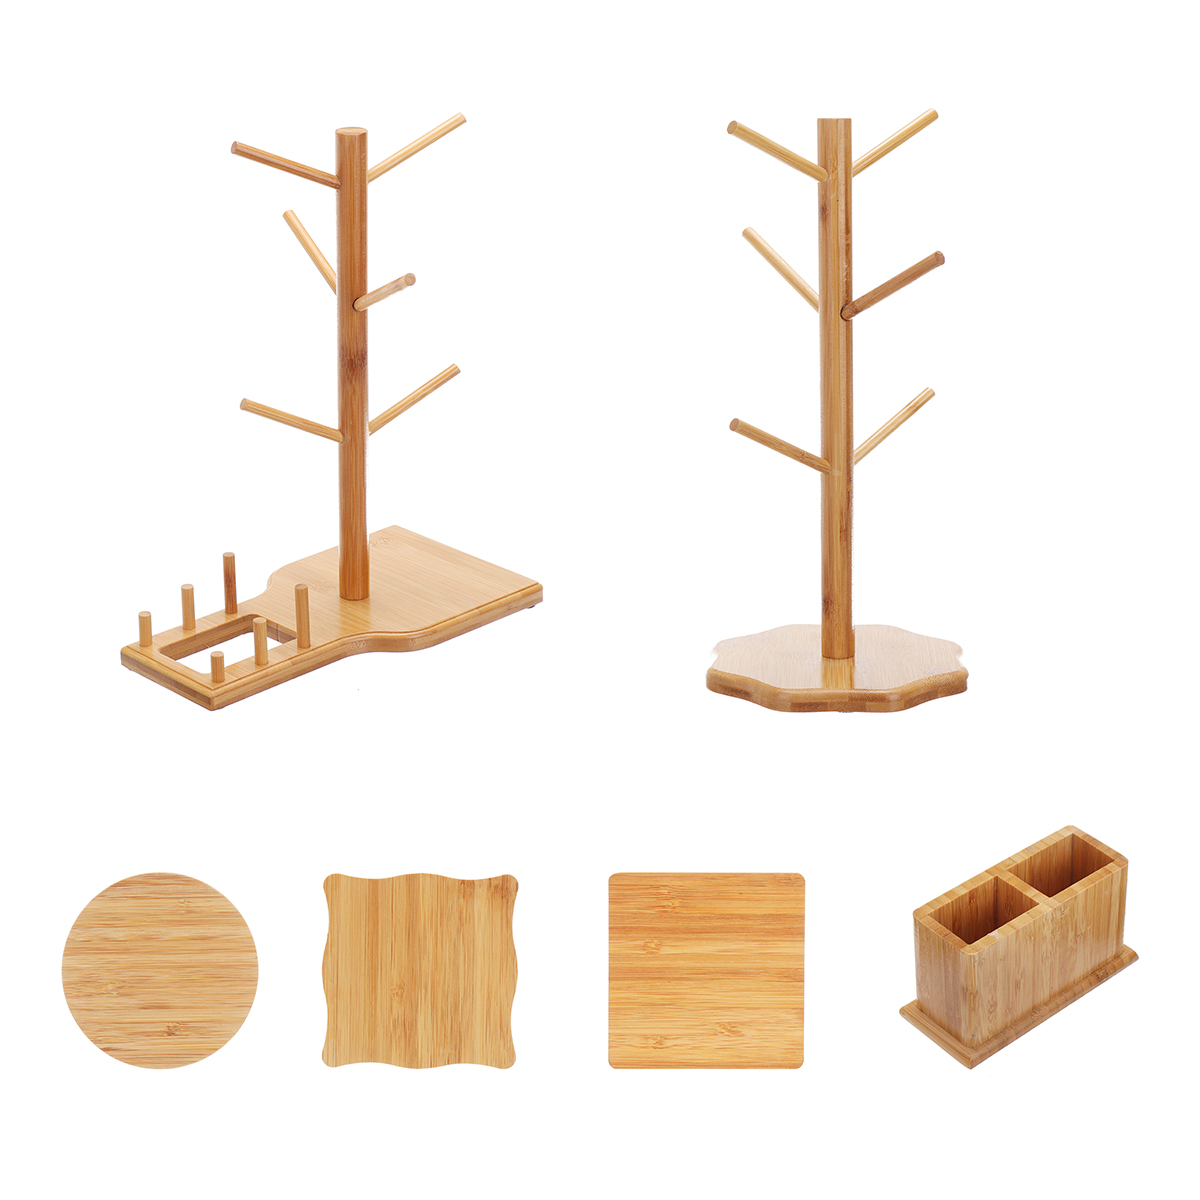 Bamboo Cup Mat Water Cup Storage Rack Creative Cup Organizing Shelf Household Office Living Wooden Gifts Supplies